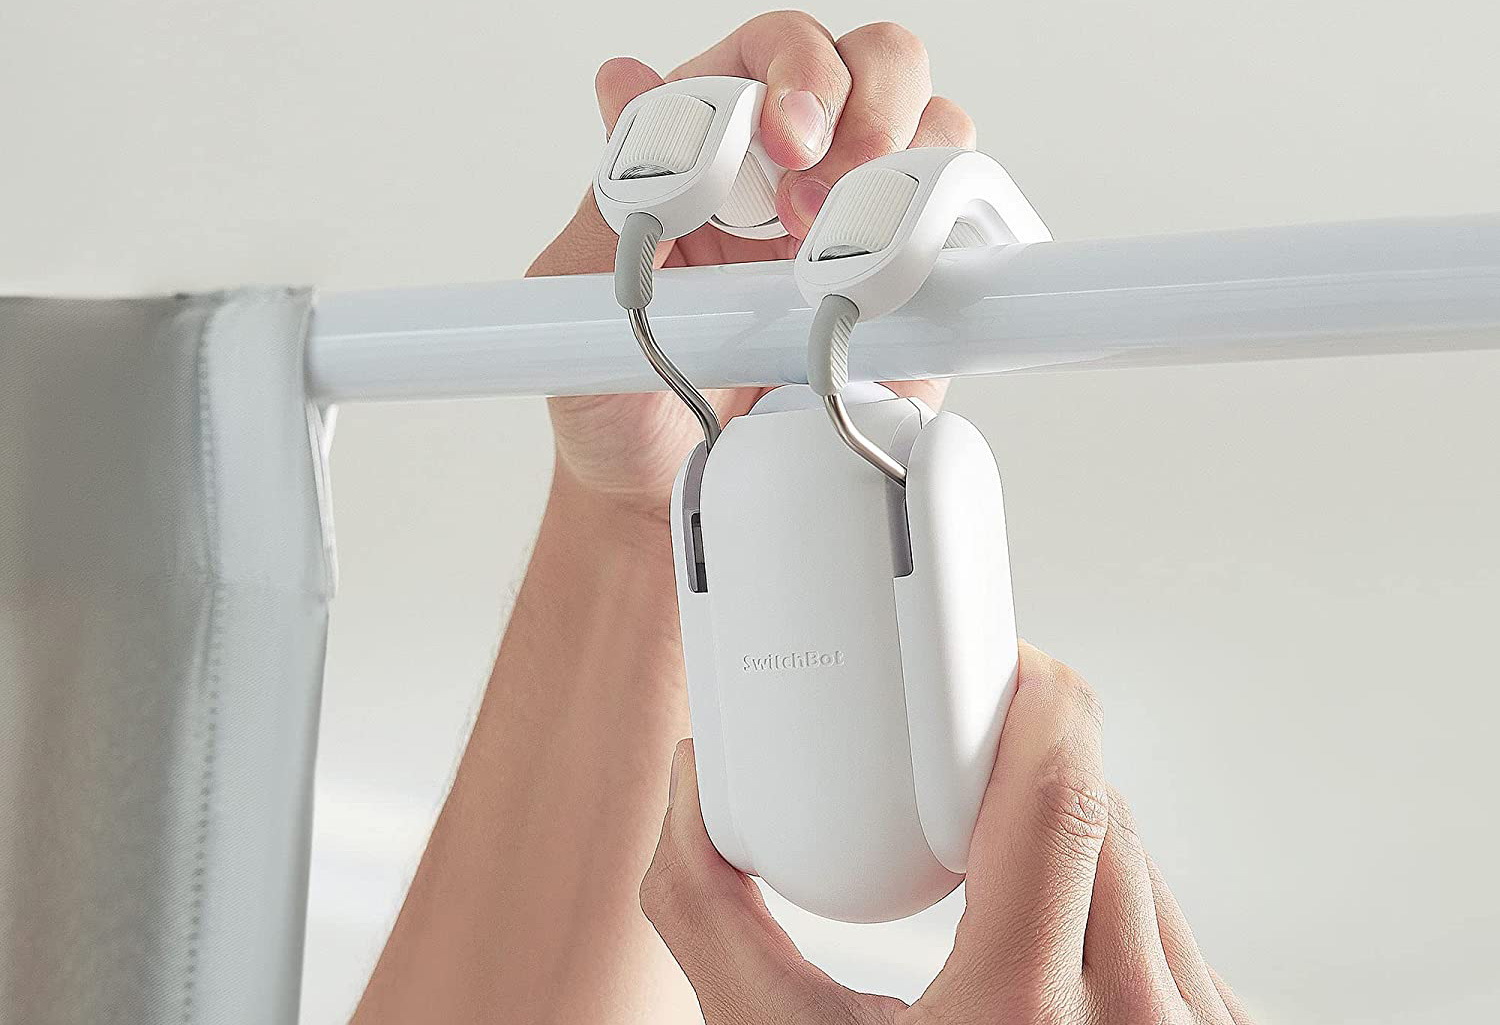 Best smart curtain opener is on sale for $99